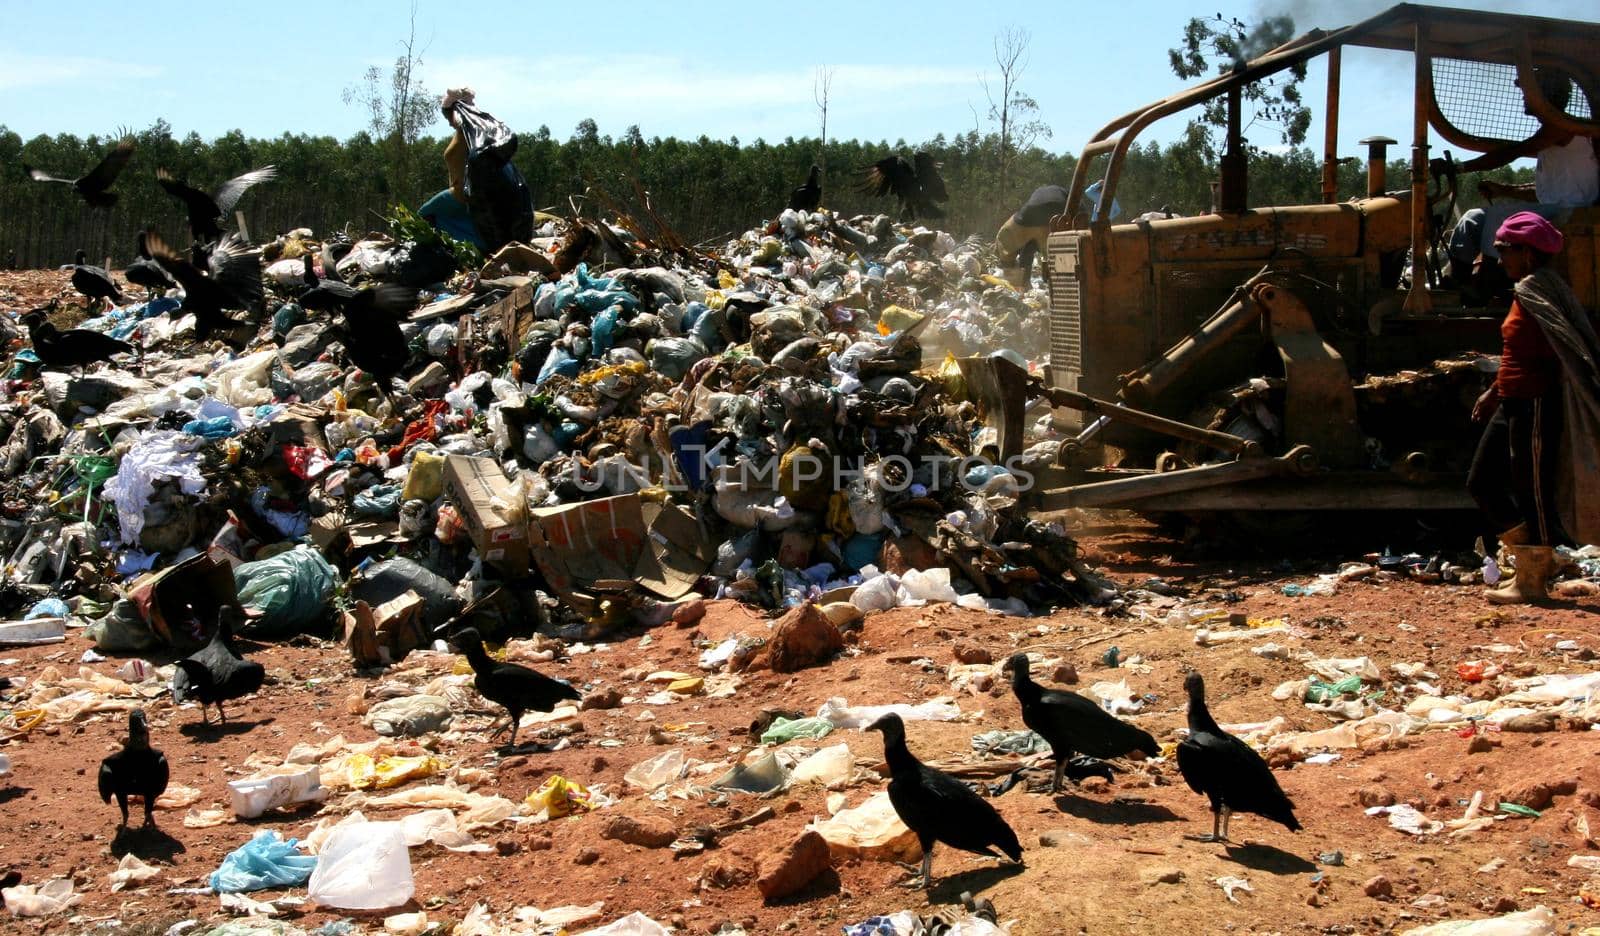 teixeira de freitas, bahia / brazil - may 6, 2008: People are seen reviving the garbage in search of material for recycling in the landfill of the city of Teixeira de Freitas.